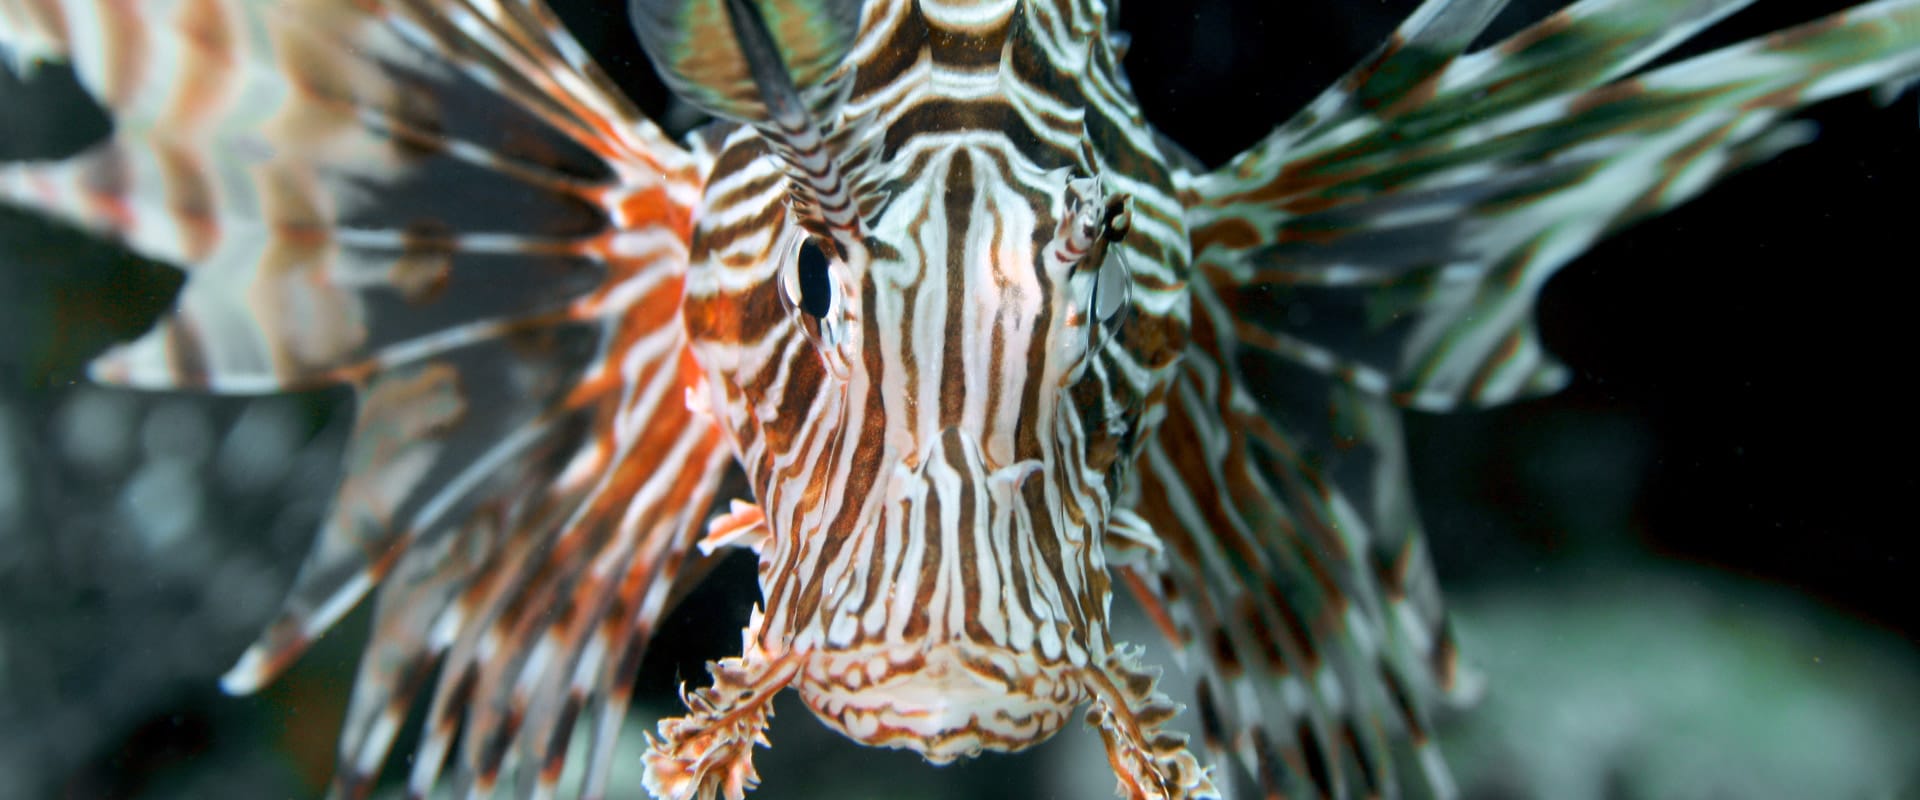 Lionfish in Dahab Red Sea